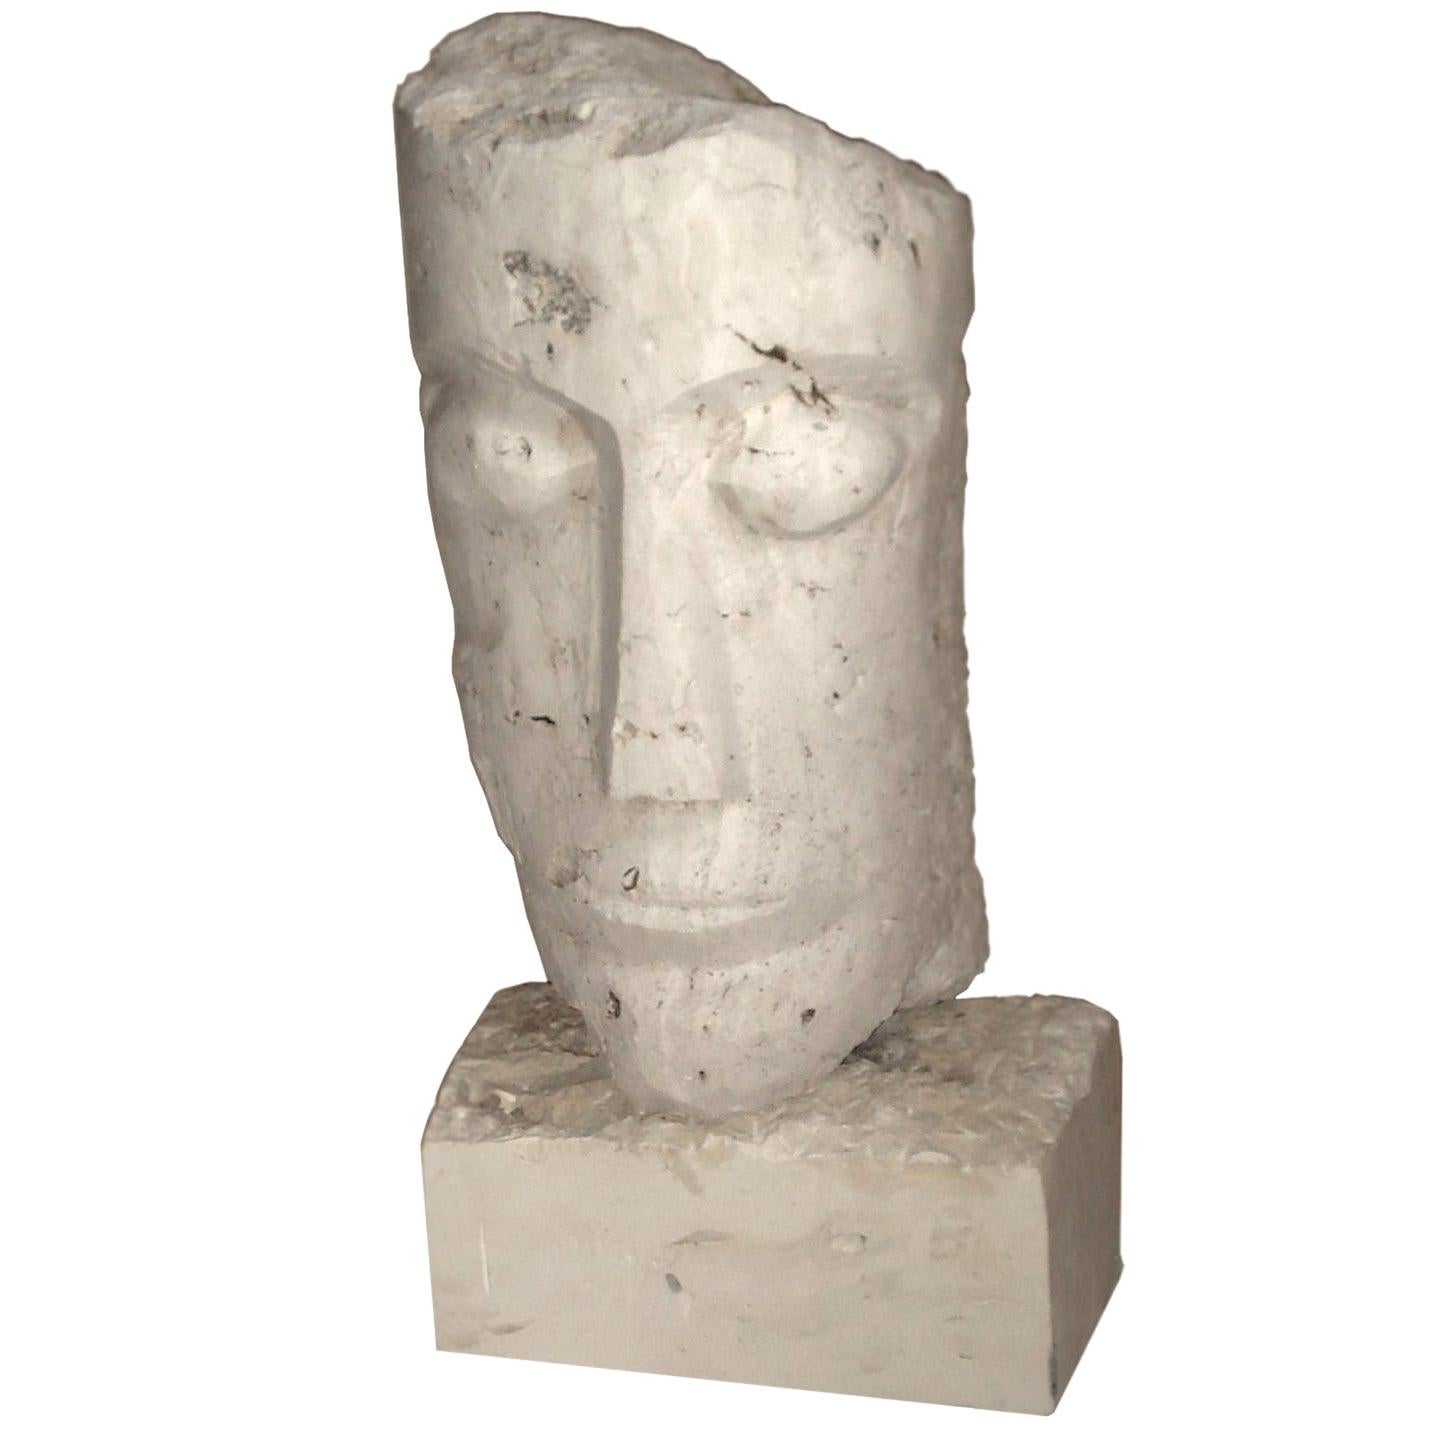 Large Cubist Carved Stone Sculpture Depicting a Man Head